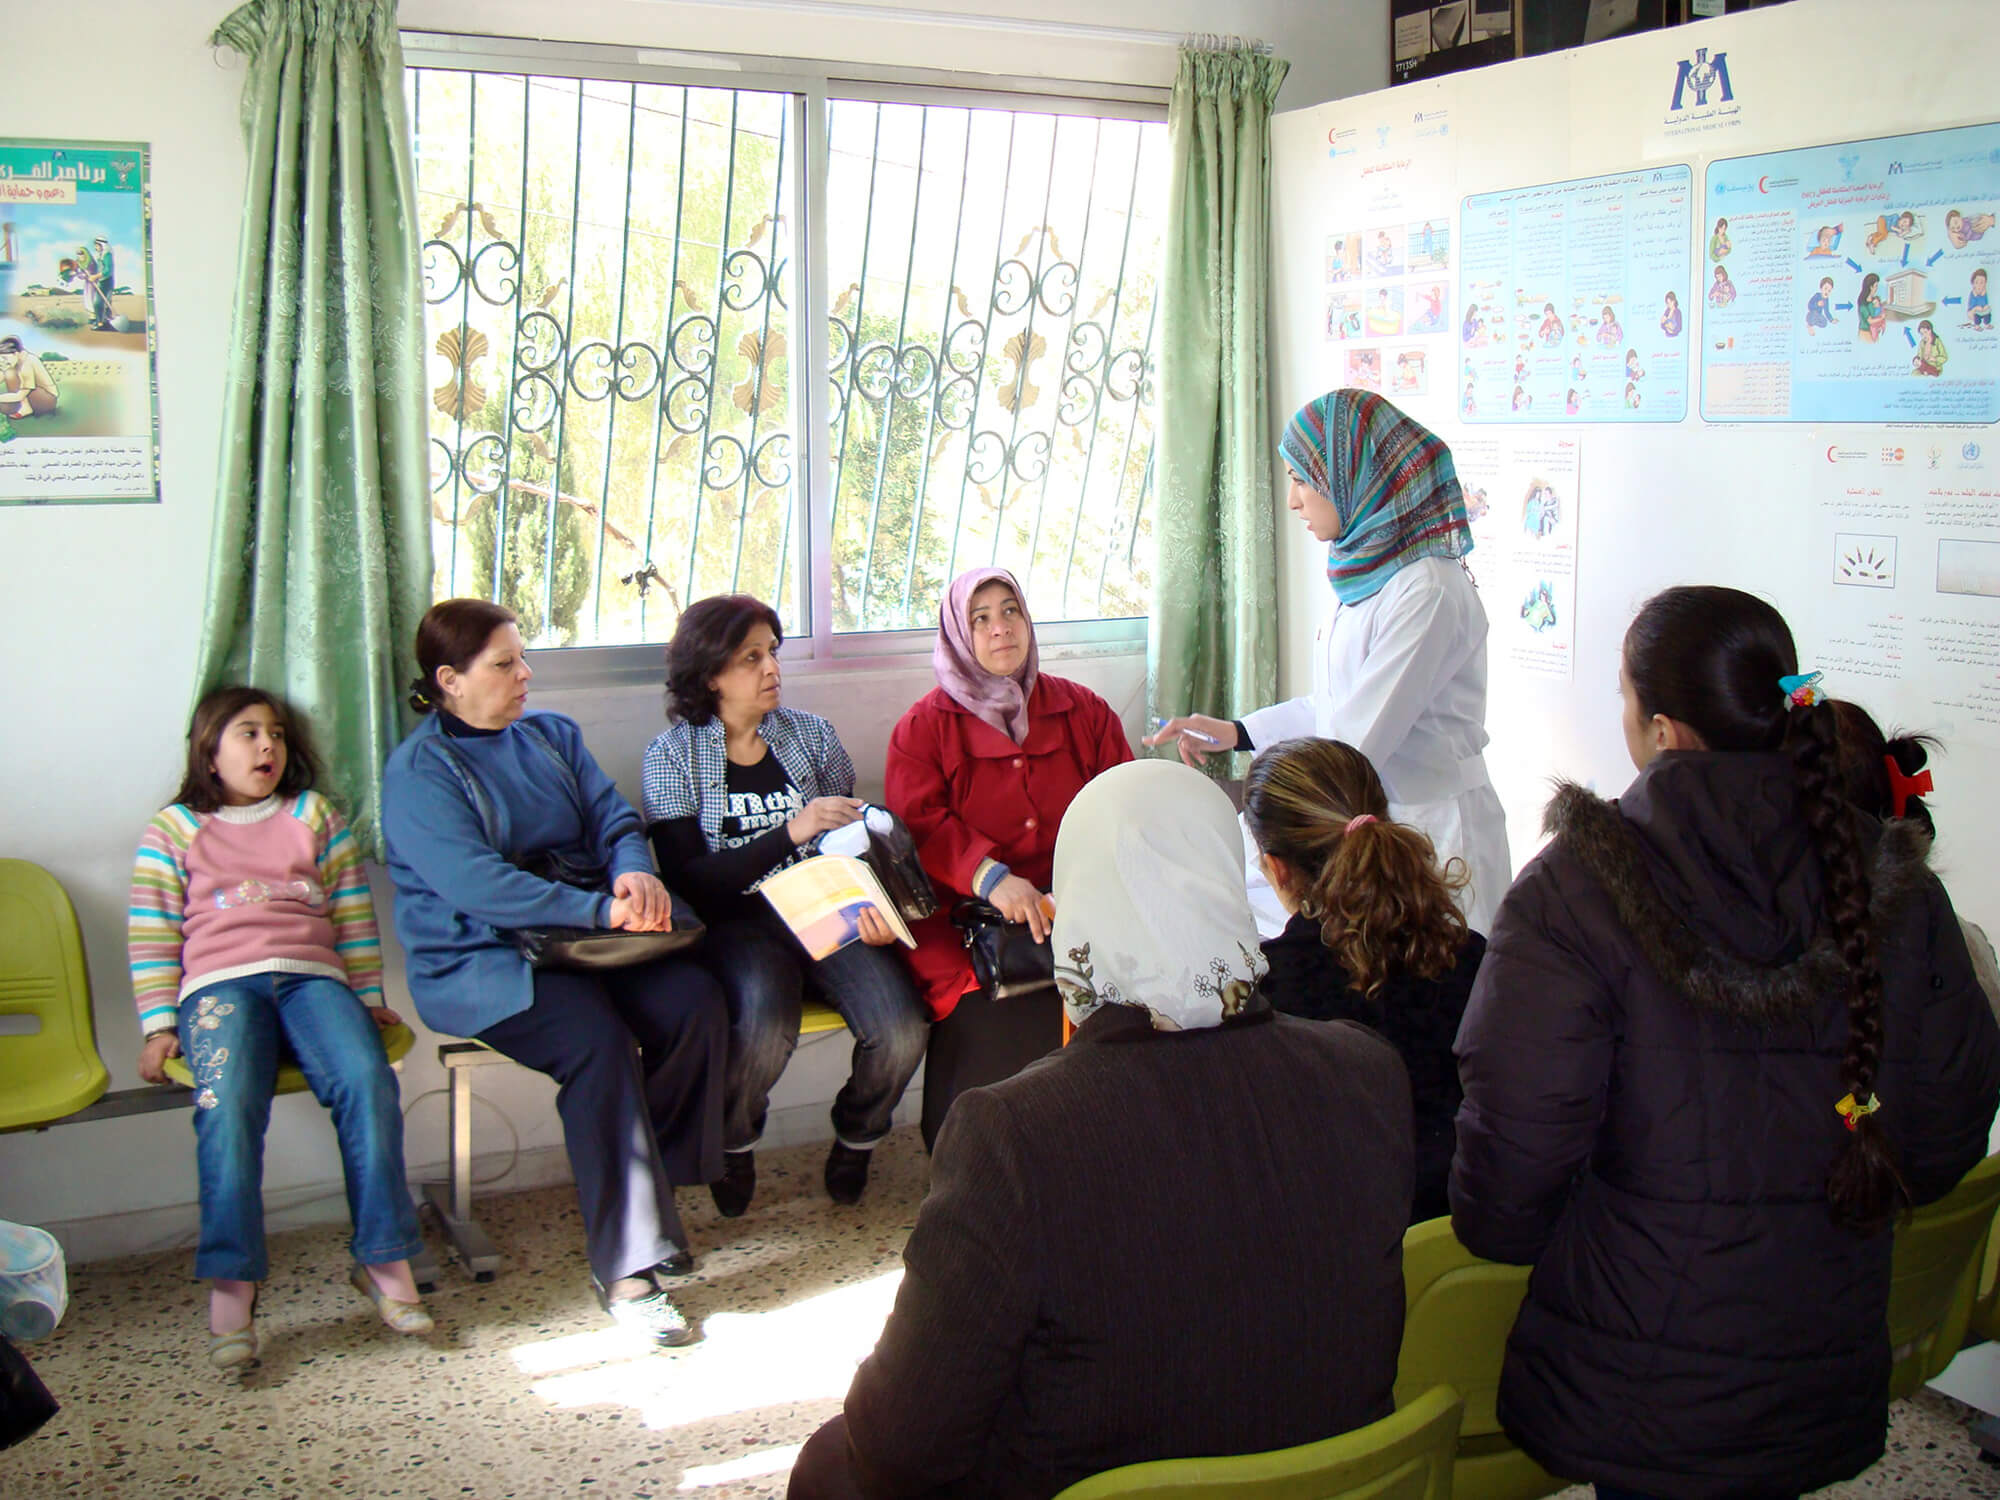 Health awareness sessions led by our Syria teams.